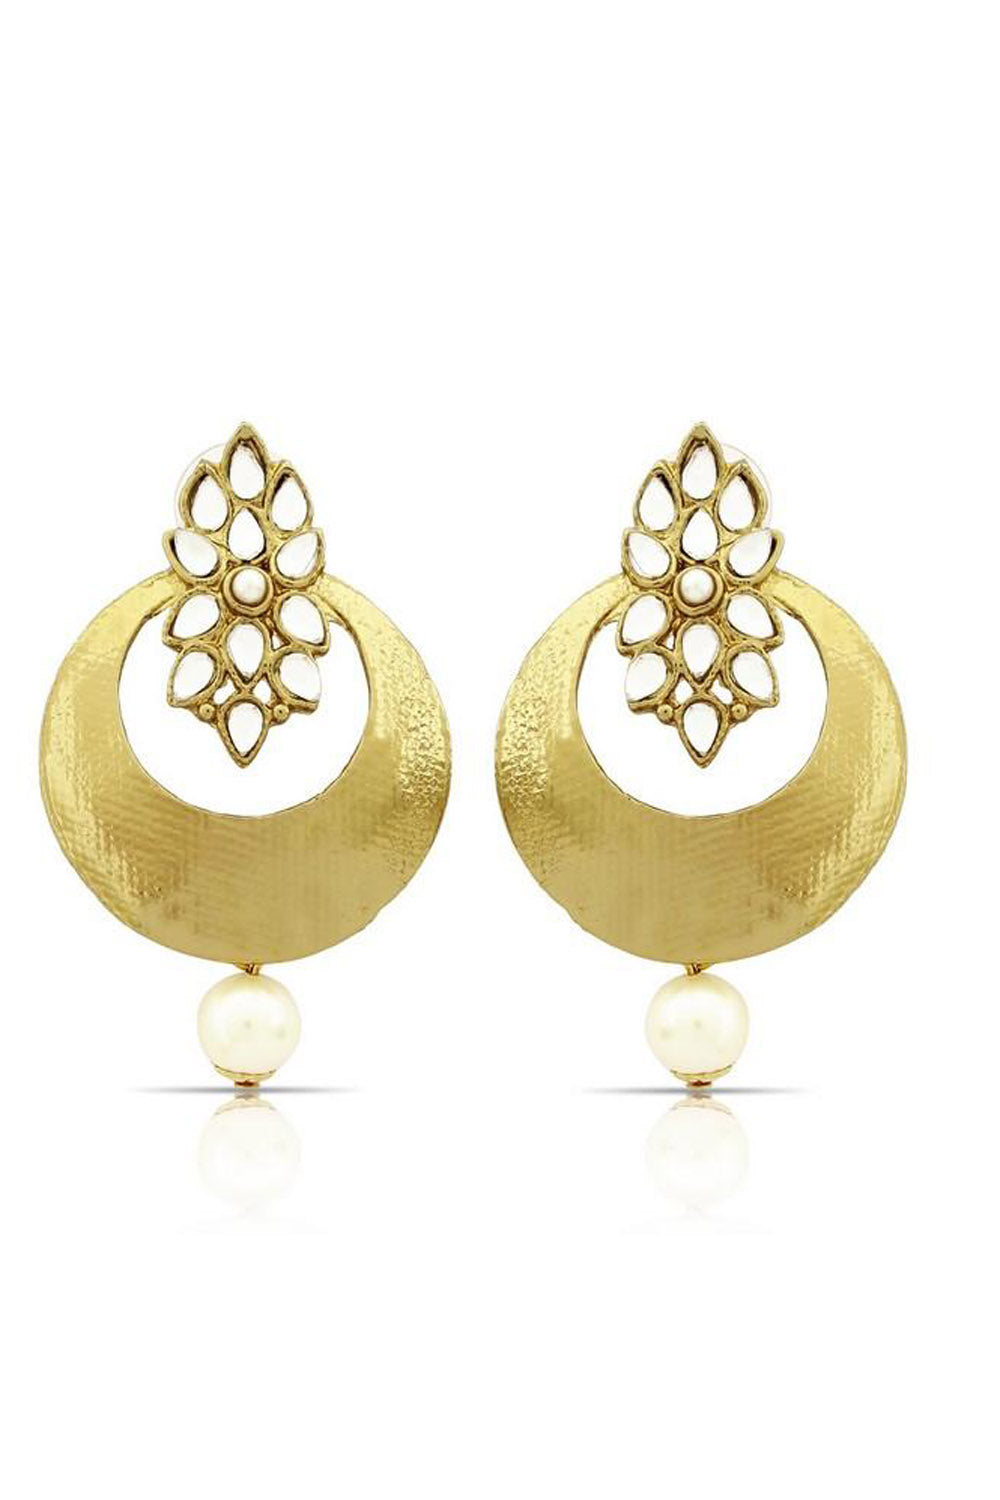 Shop  Alloys Earring  For Women's in Gold At KarmaPlace